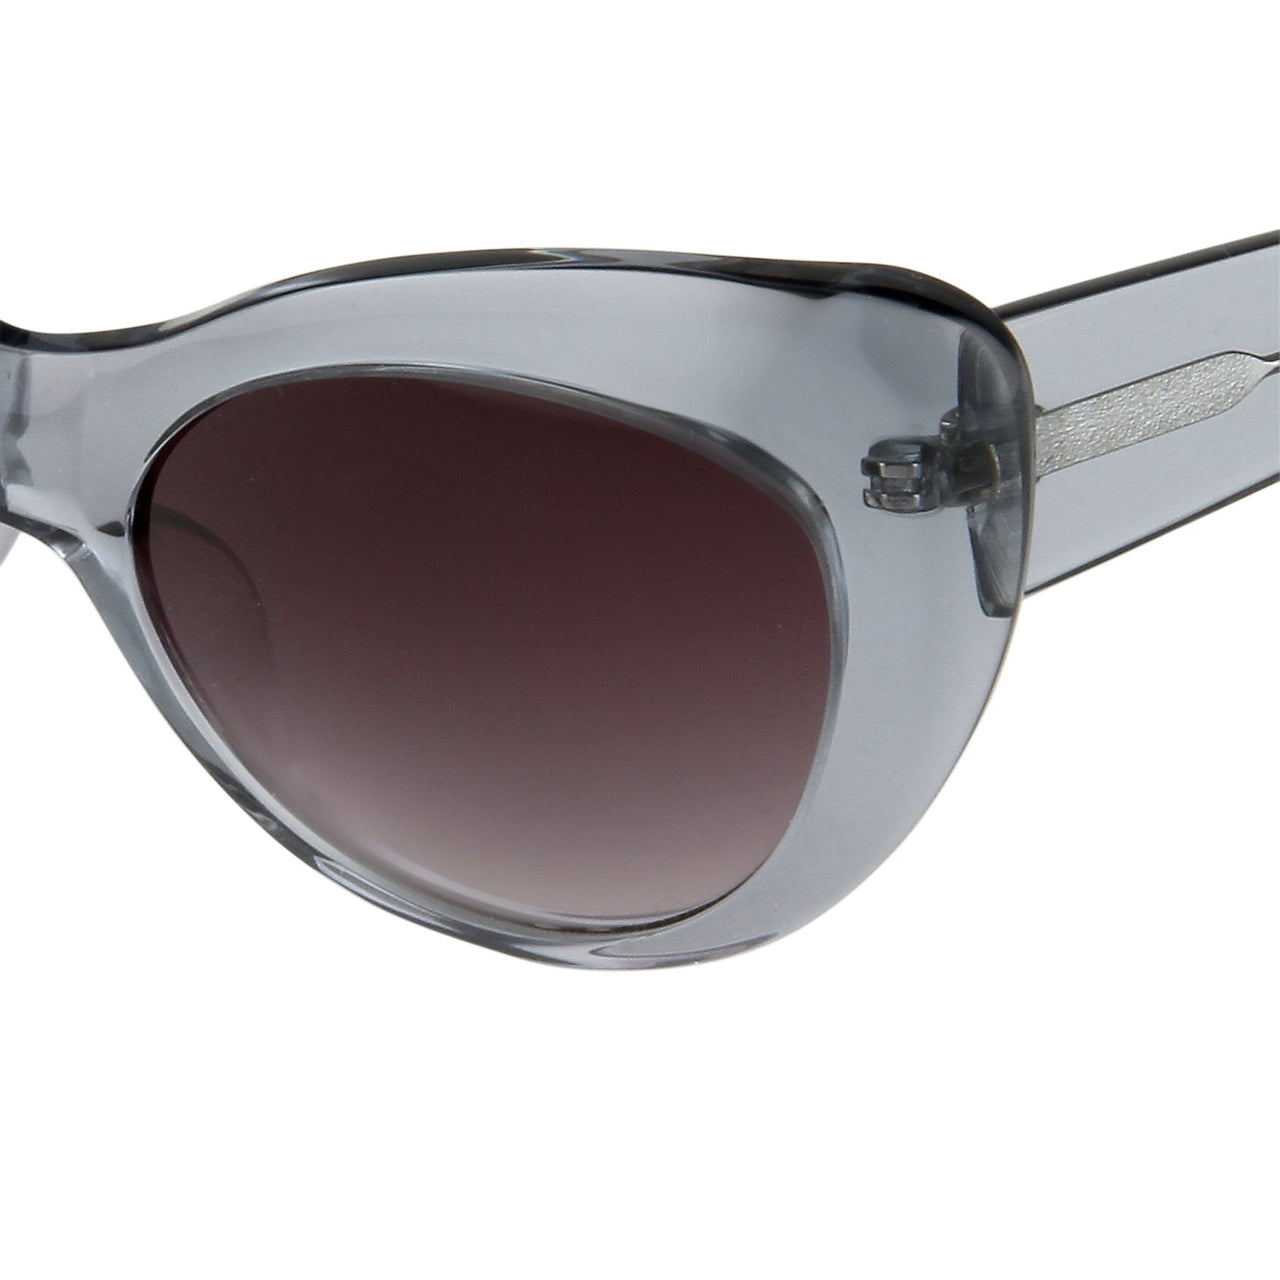 Agent Provocateur Women Sunglasses Cat Eye Blue and Grey Lenses Category 3 - AP54C7SUN - Watches & Crystals